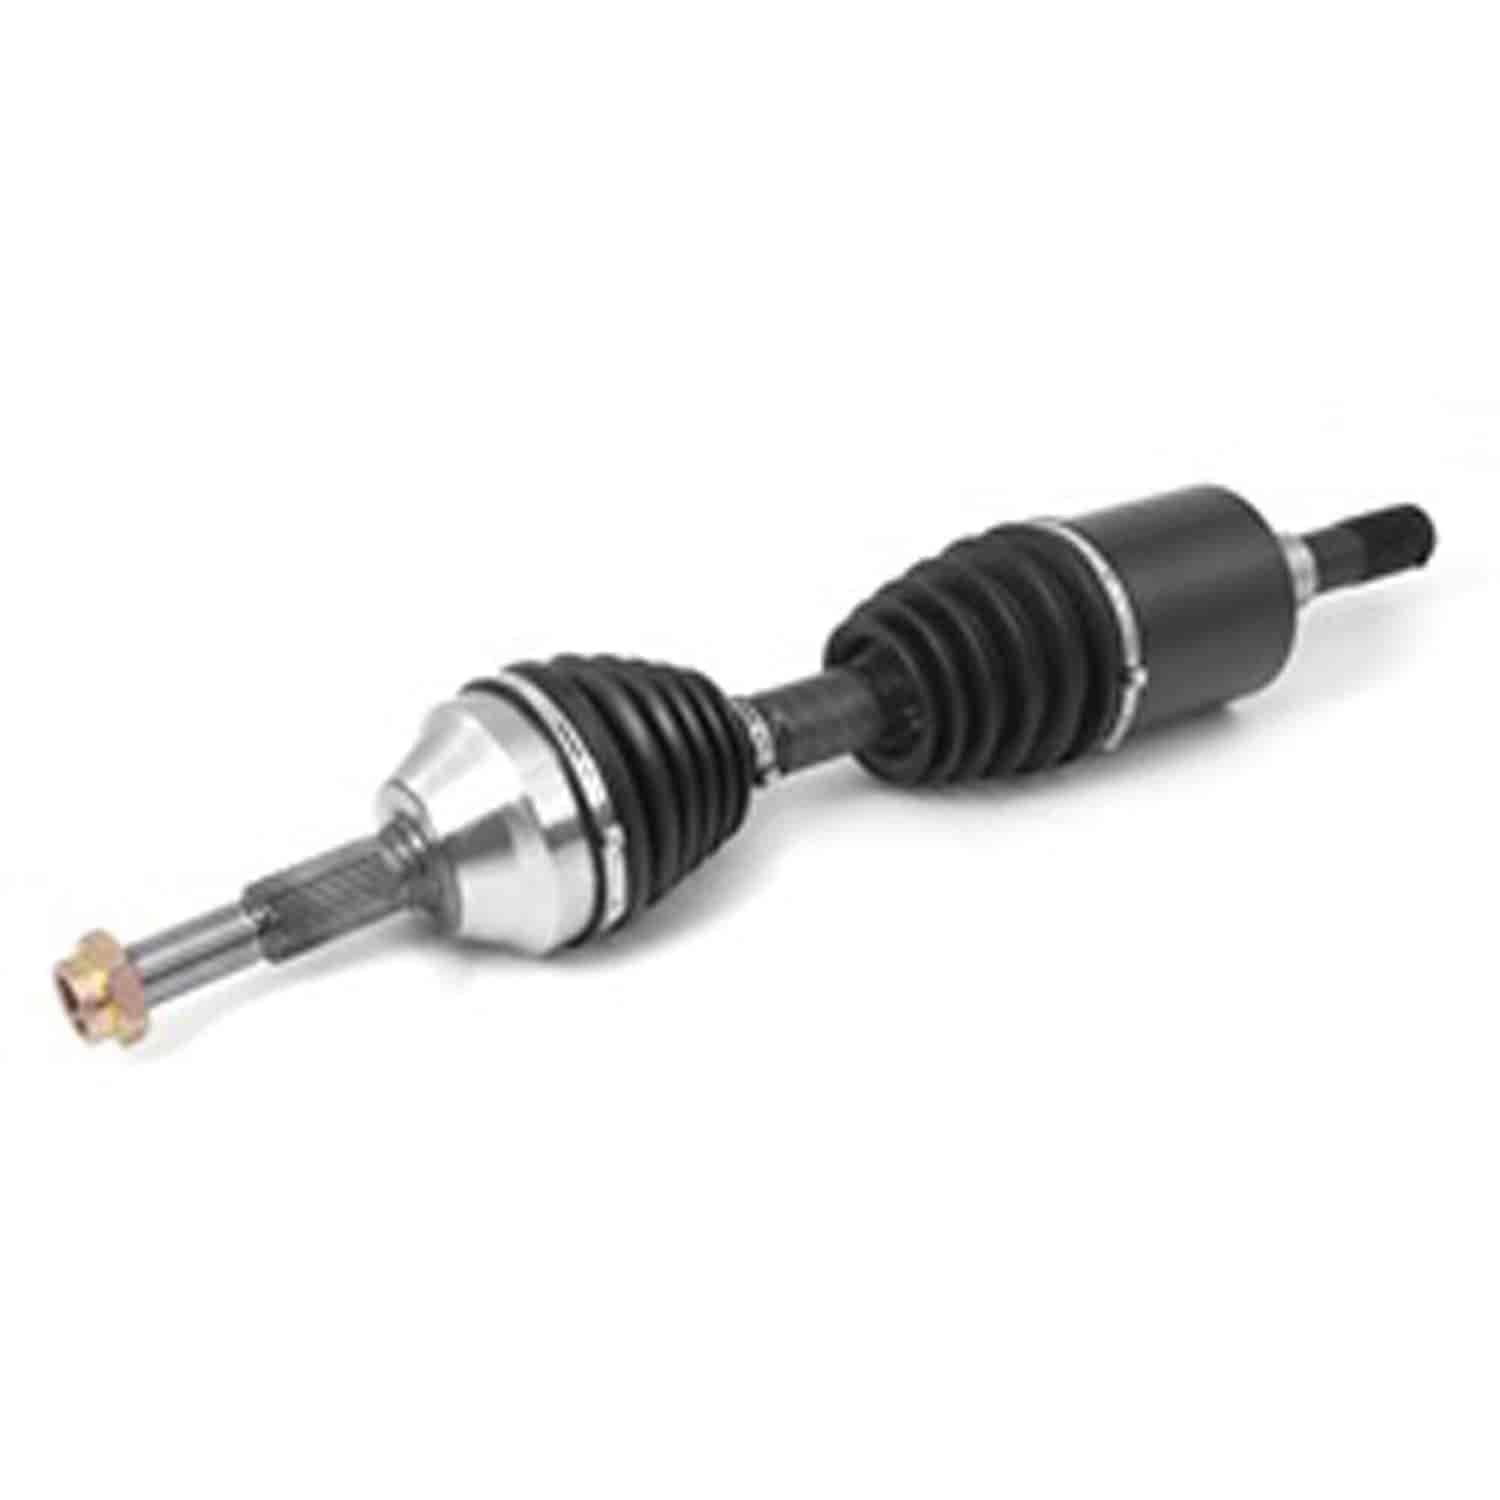 This front axle shaft assembly from Omix-ADA fits the right side on 07-11 Jeep Compass with a 2.0L o